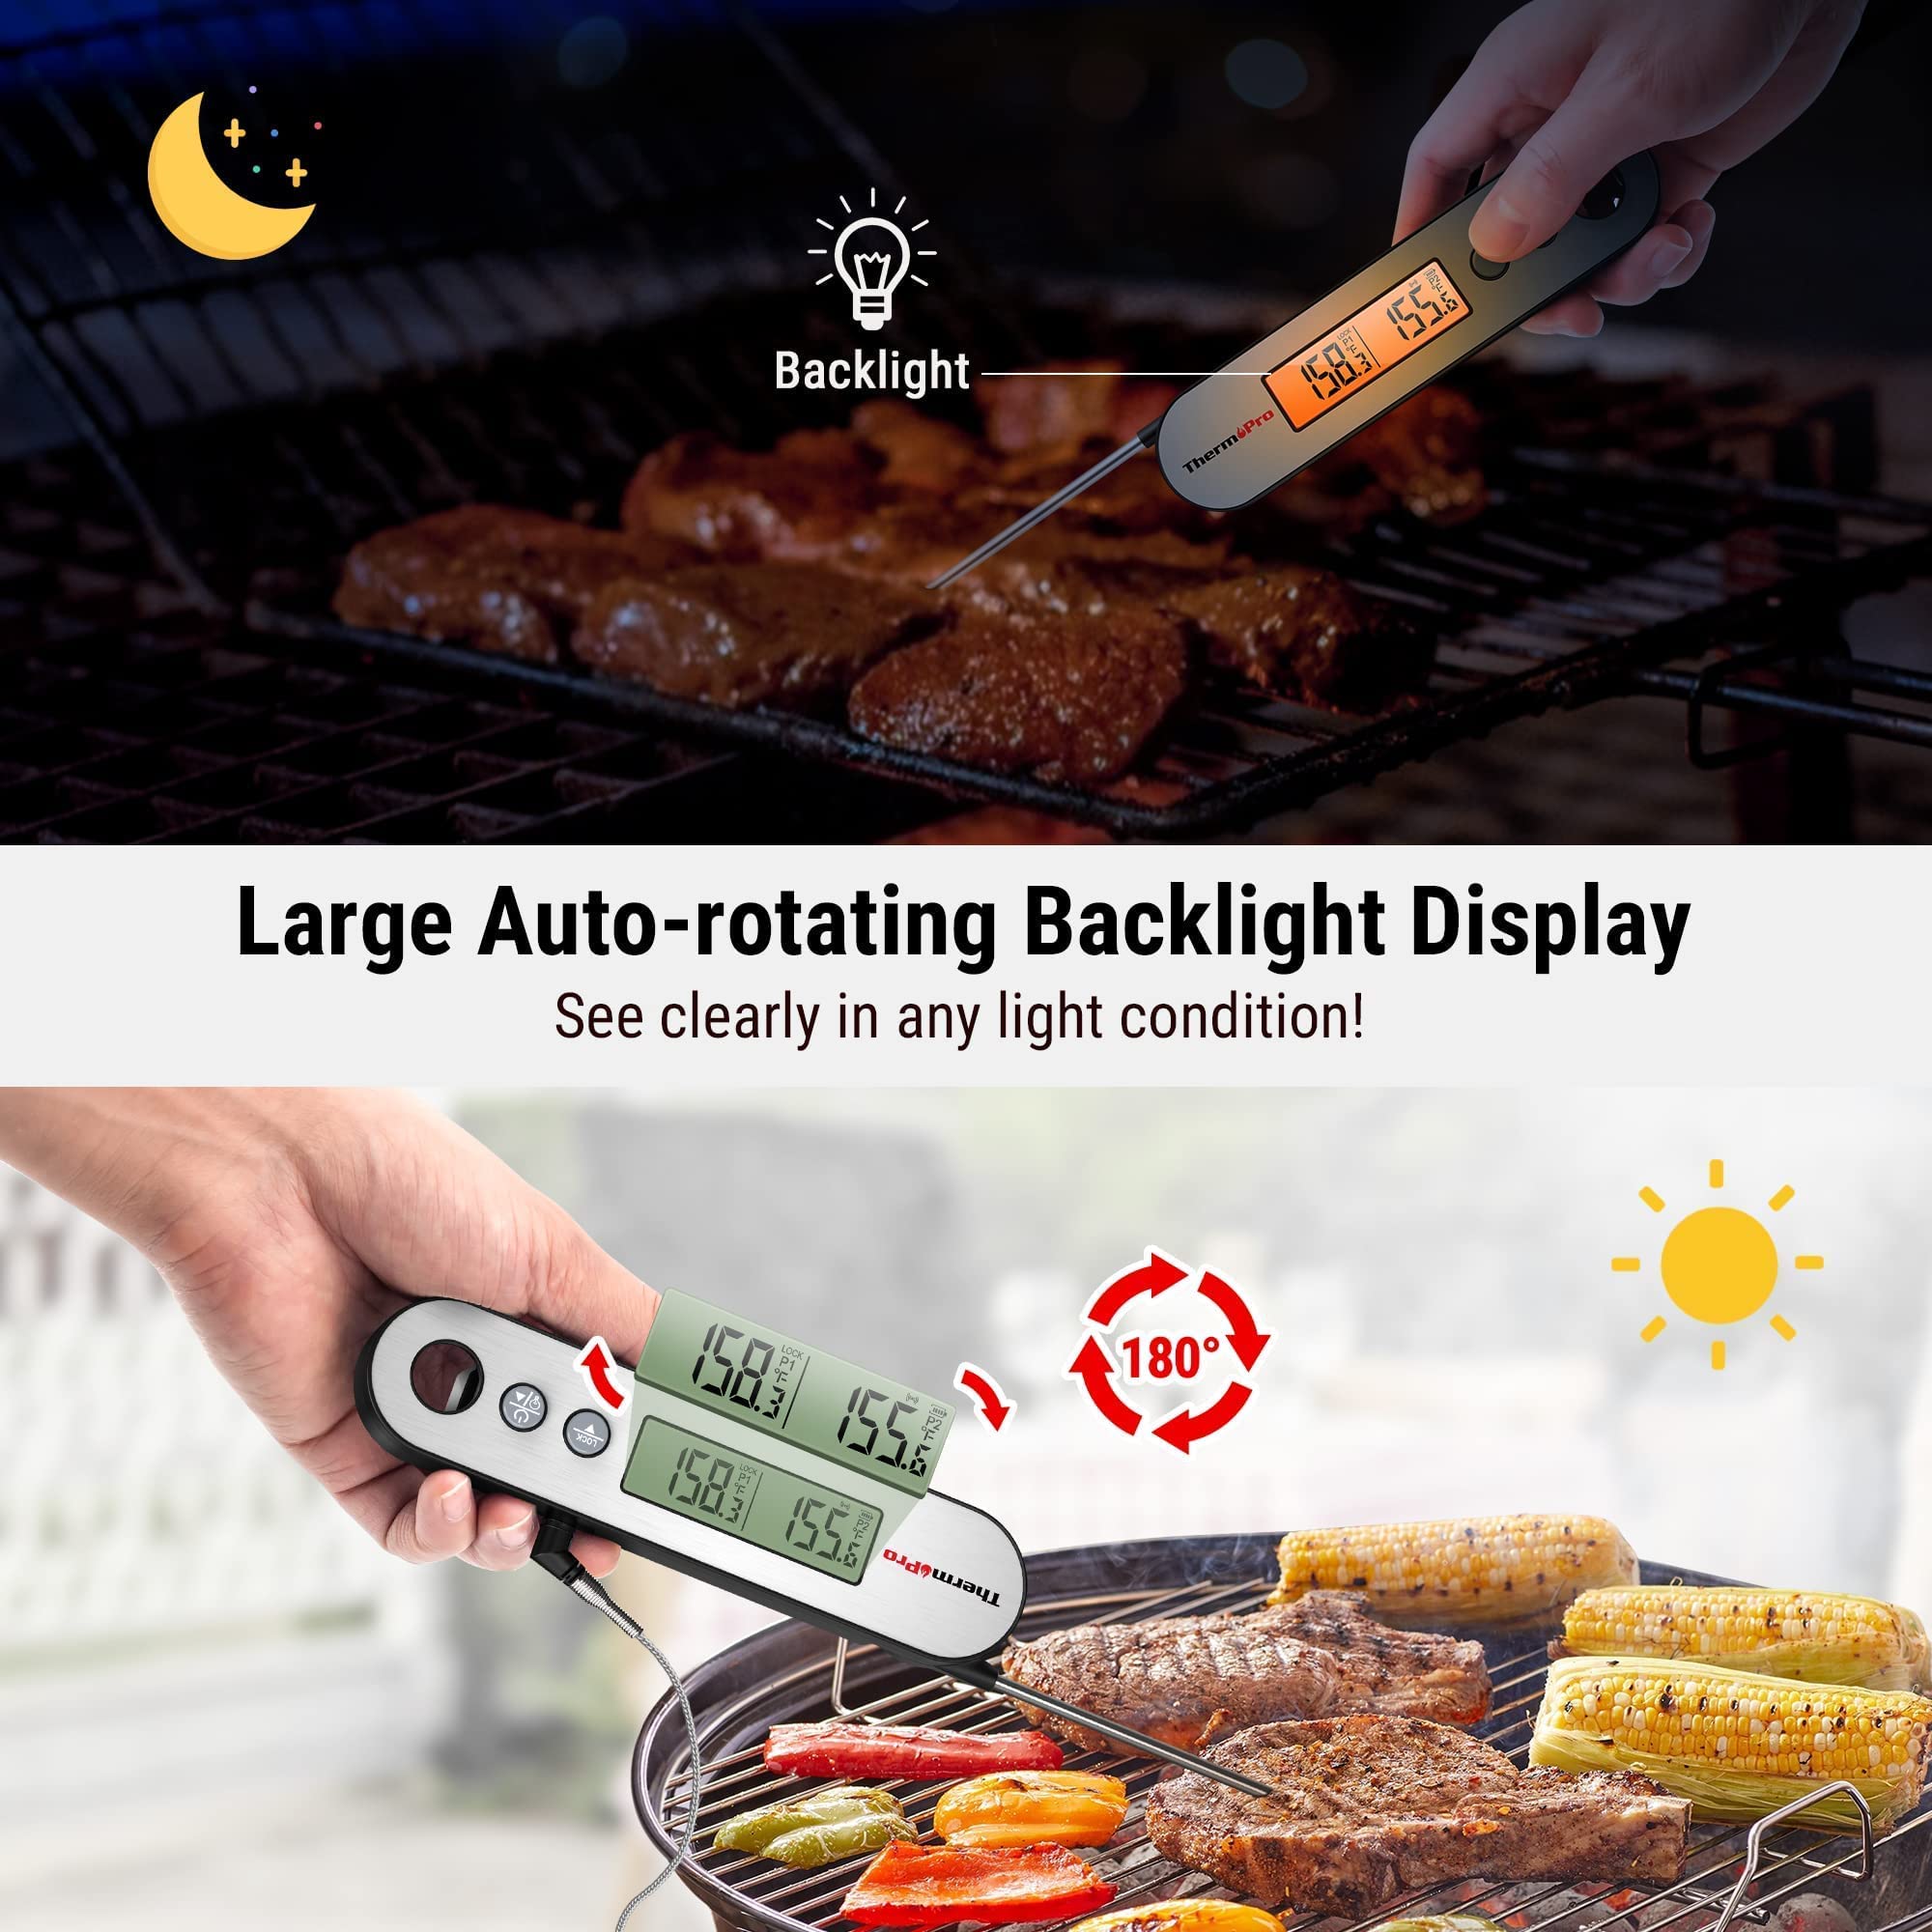 ThermoPro TP16S Digital Meat Thermometer for Cooking and Grilling +ThermoPro TP610 Dual Probe Instant Read Meat Thermometer